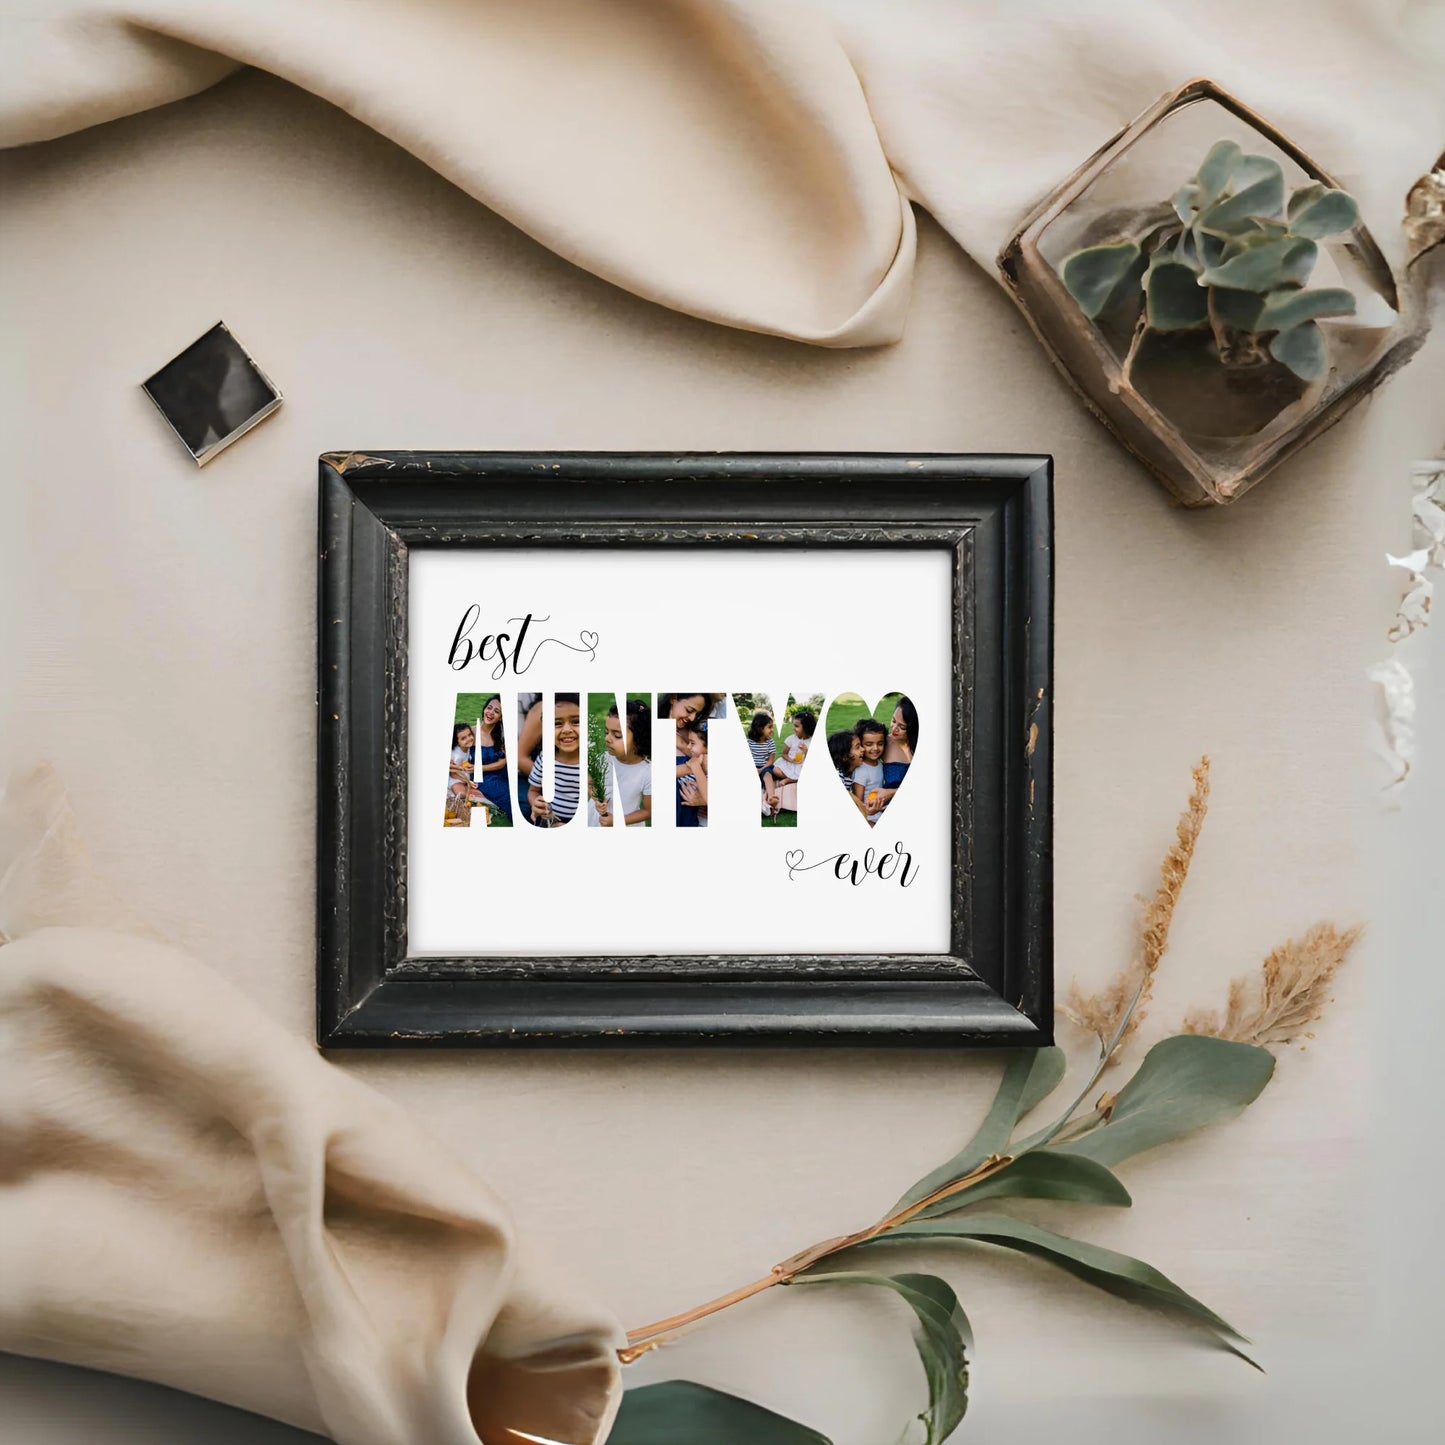 Quick Edit Yourself Aunty Photo Collage Last Minute Gift for Christmas